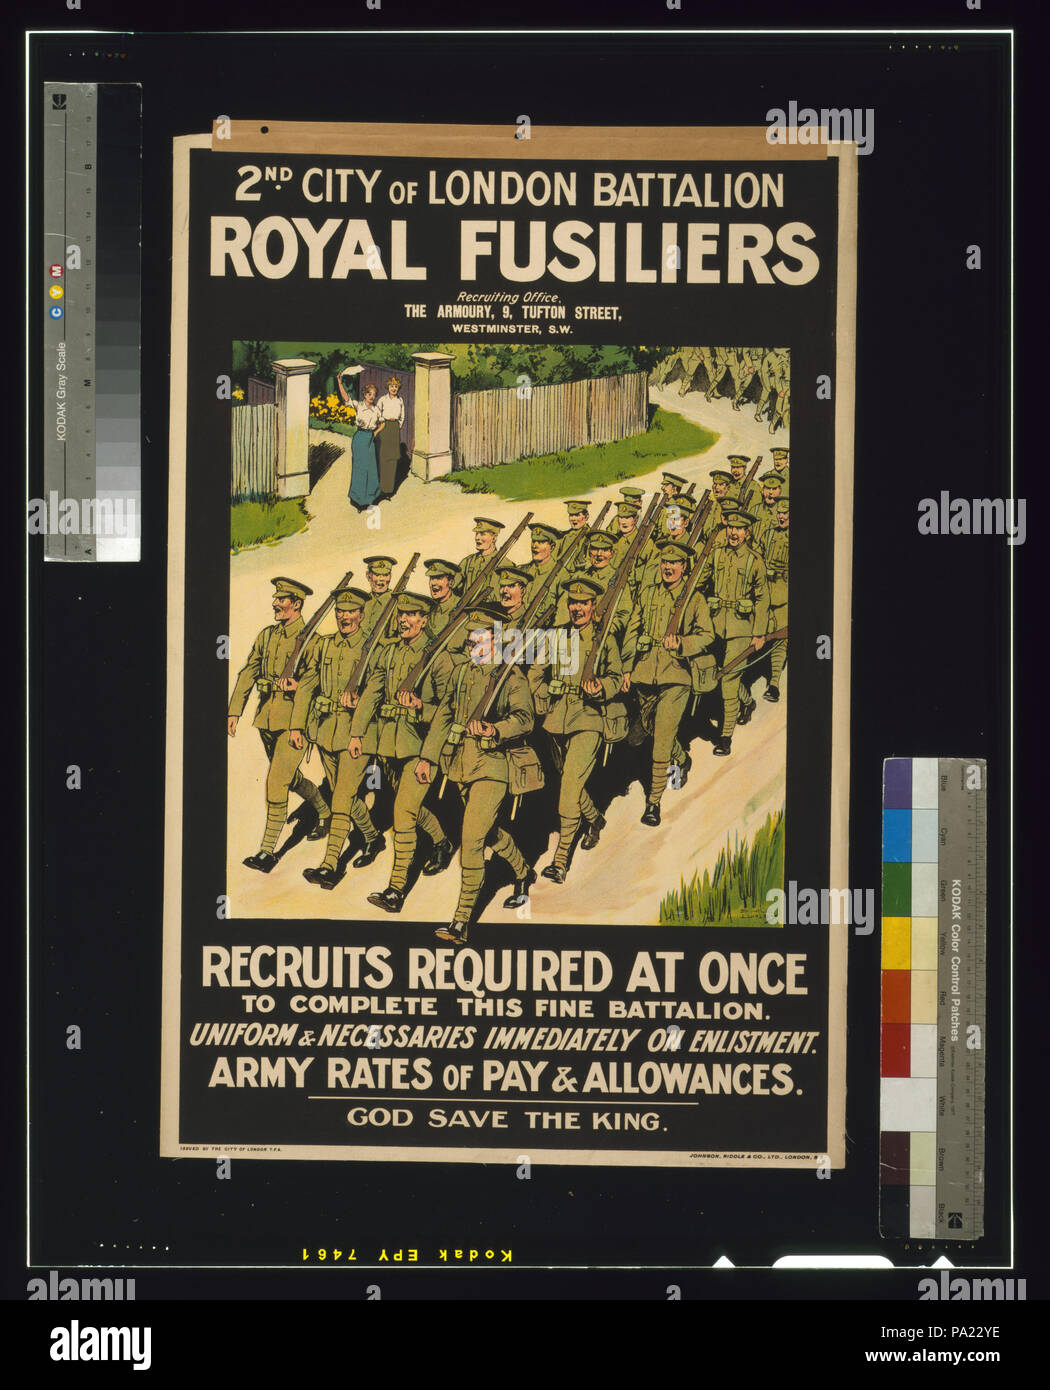 44 2nd City of London Battalion, Royal Fusiliers. Recruits required at once to complete this fine battalion LCCN2003668164 Stock Photo